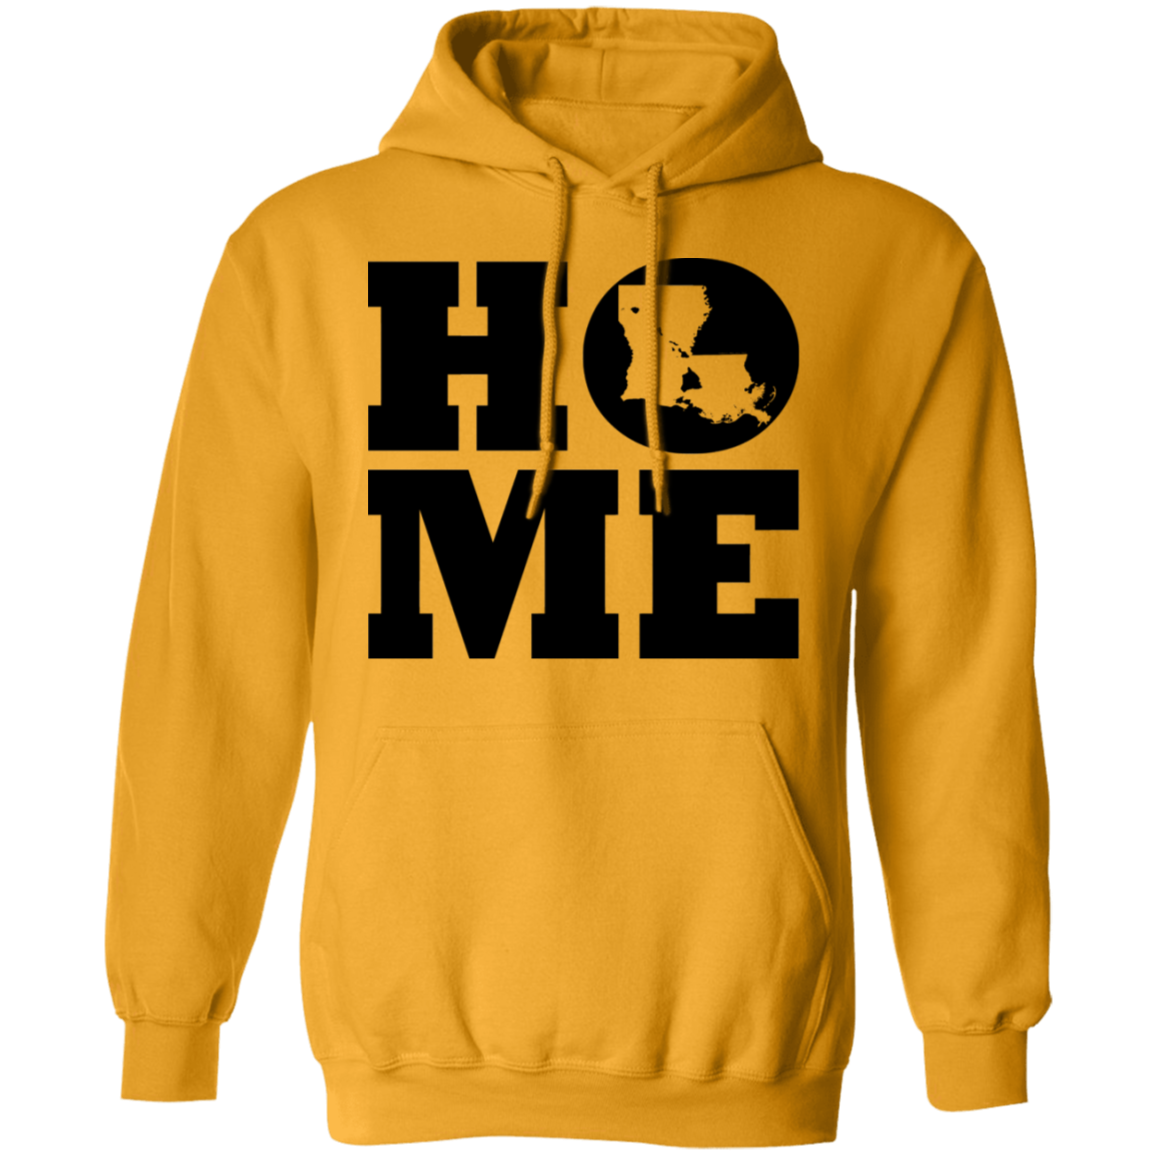 Home Roots Hawai'i and Louisiana Pullover Hoodie